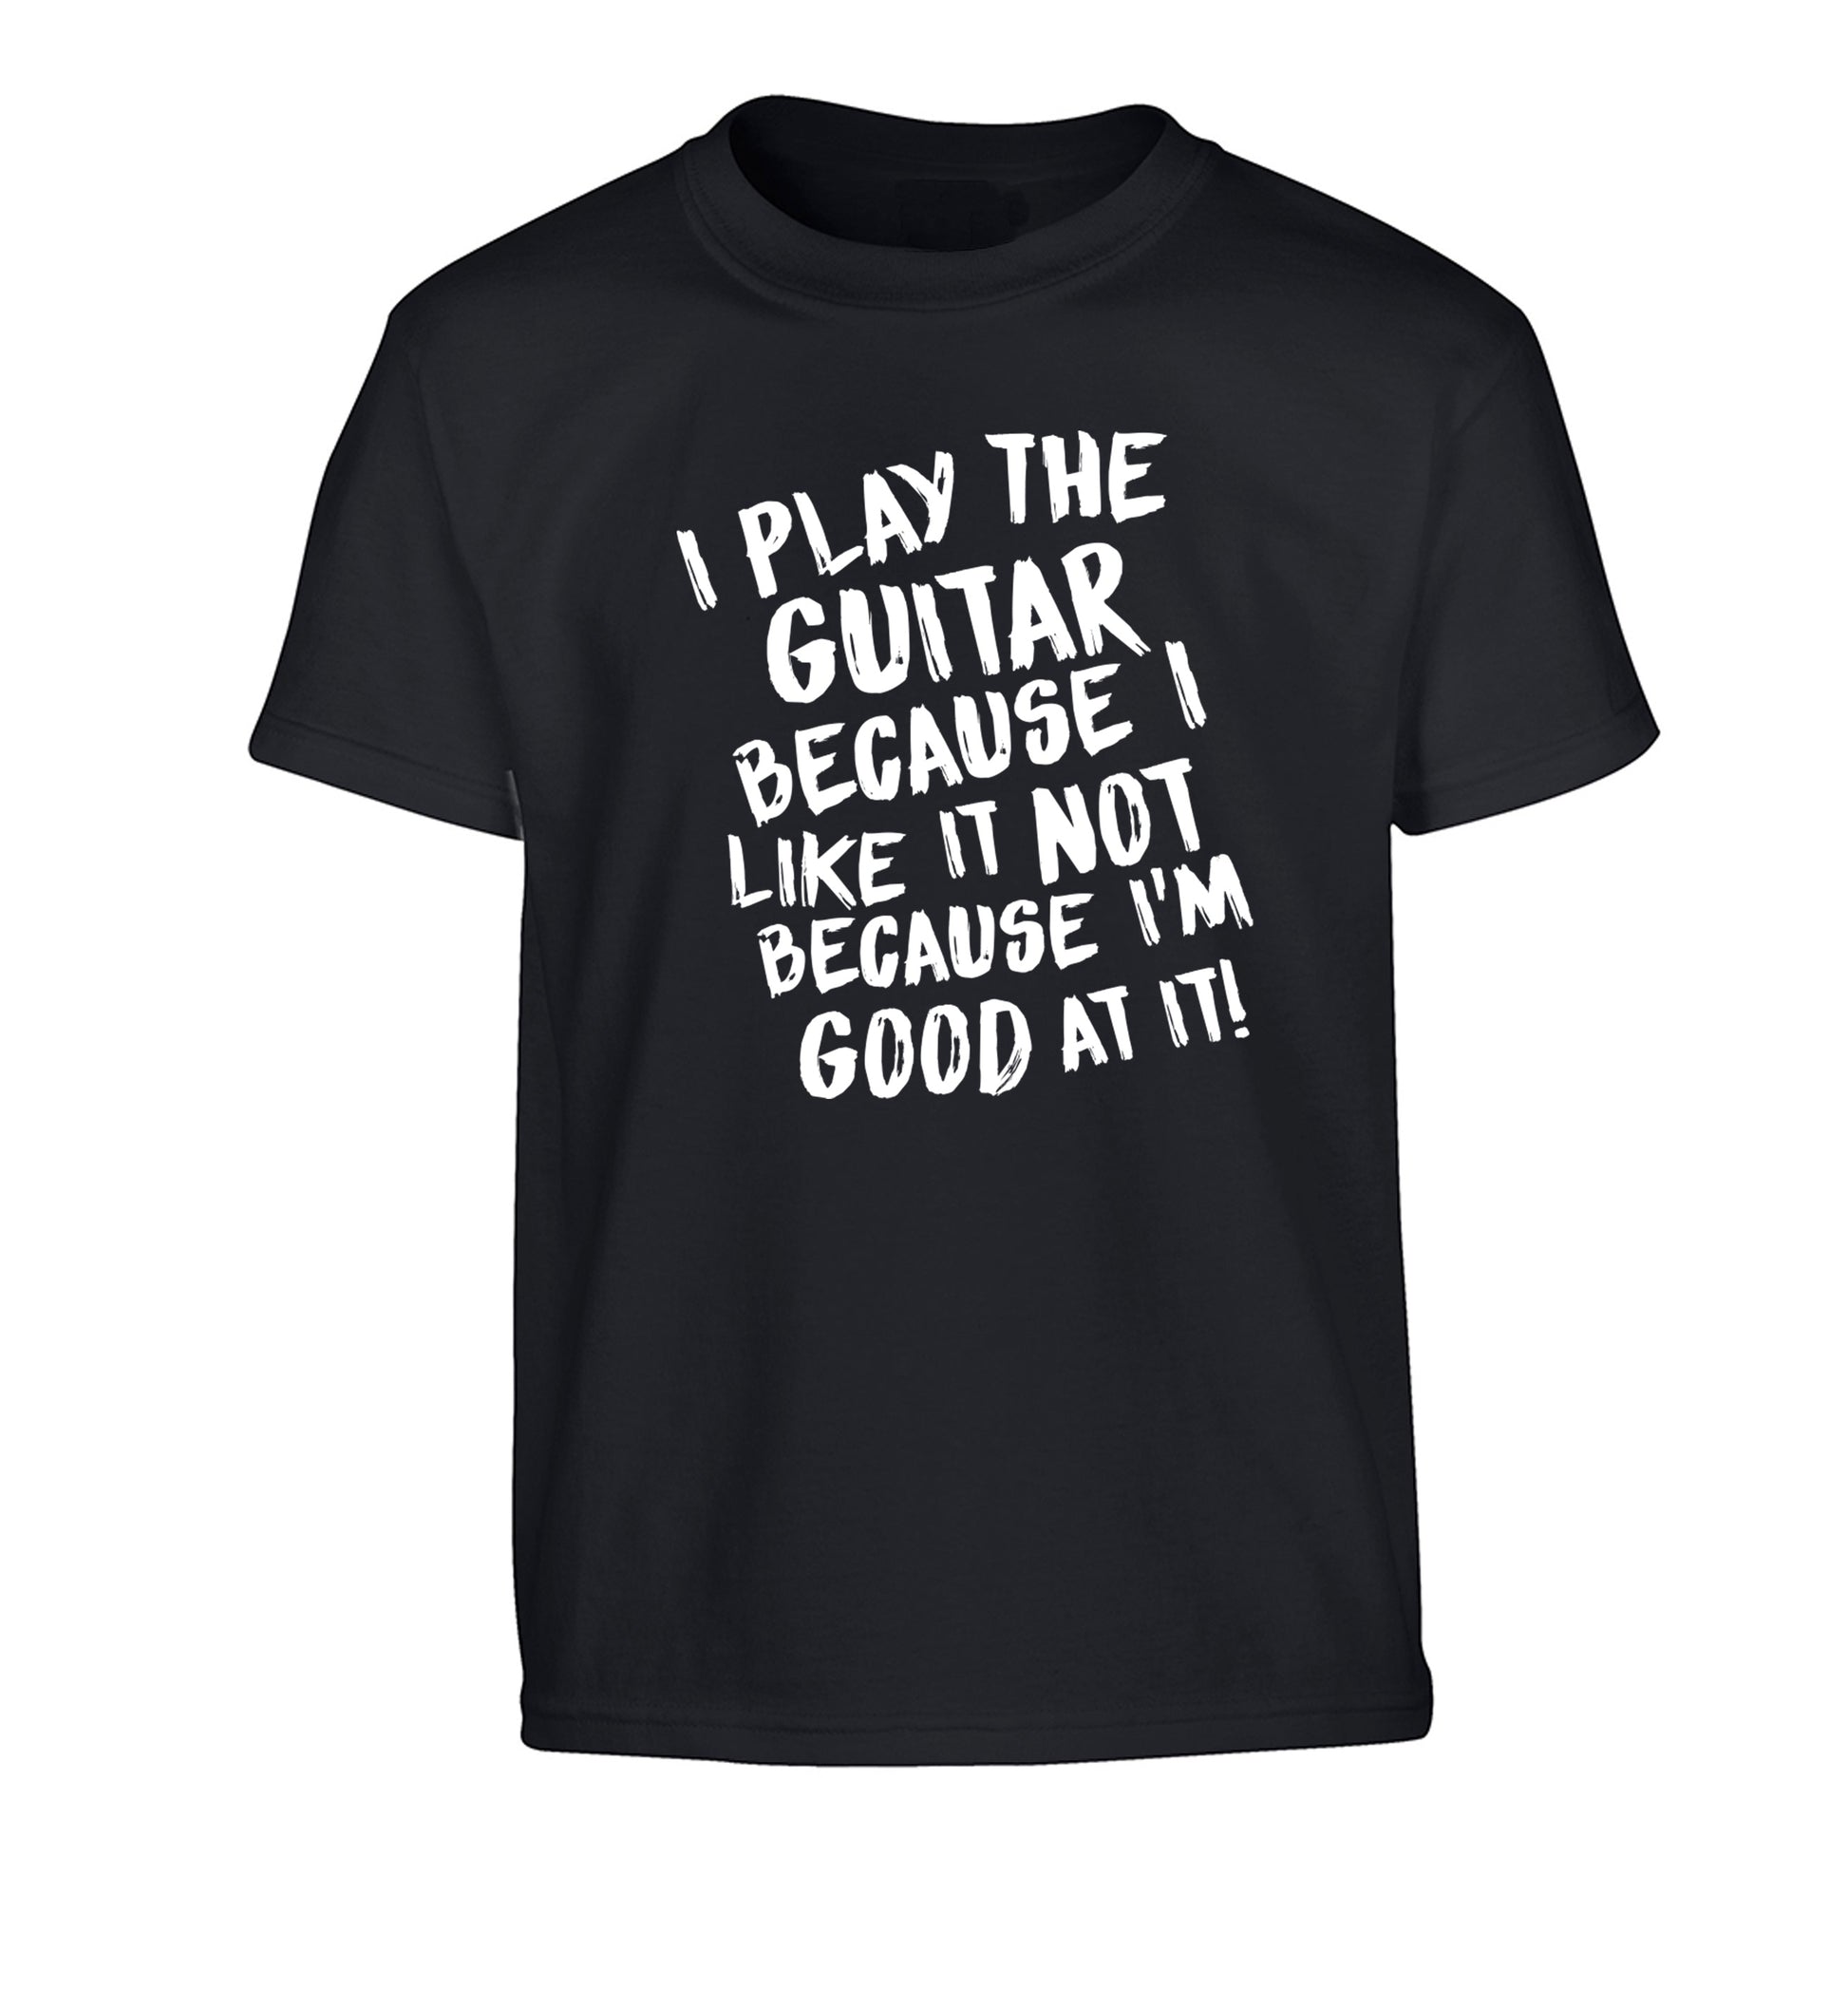 I play the guitar because I like it not because I'm good at it Children's black Tshirt 12-14 Years